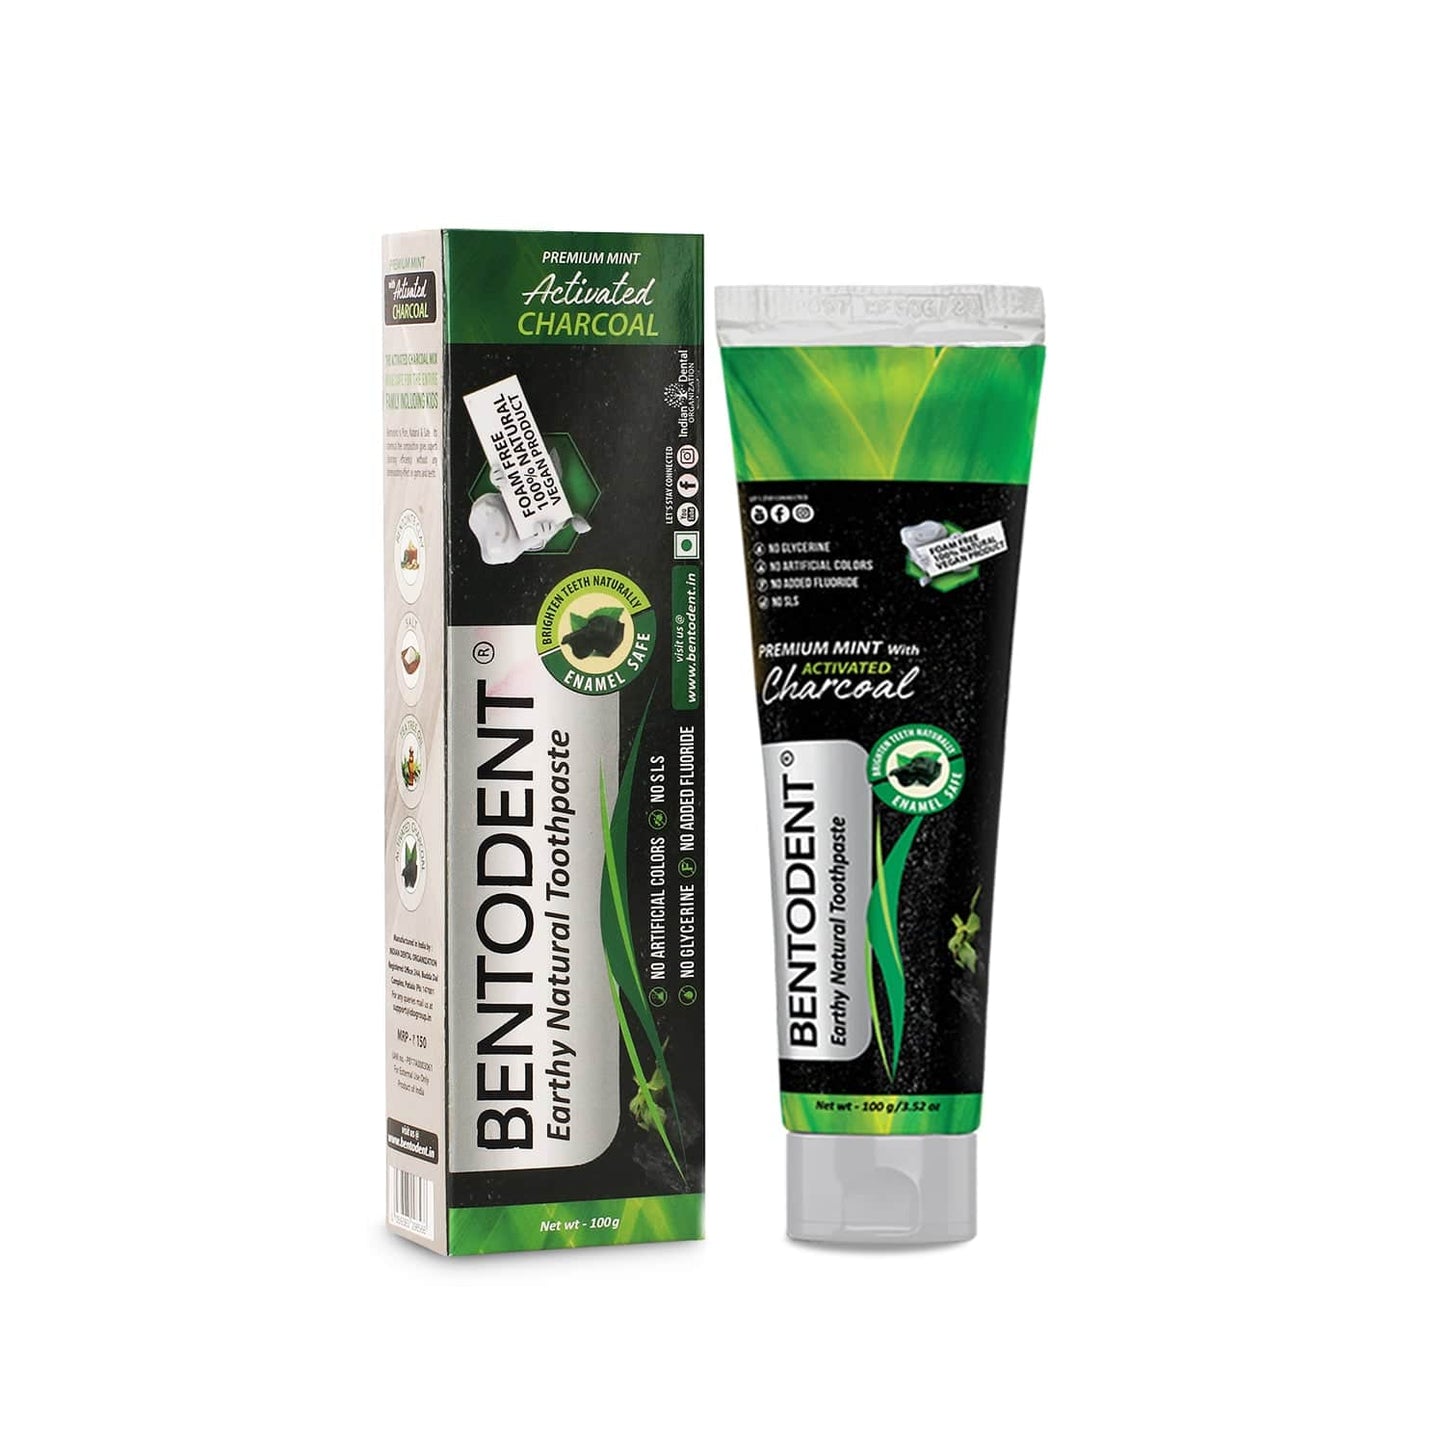 BENTODENT TOOTHPASTE 100G CHARCOAL